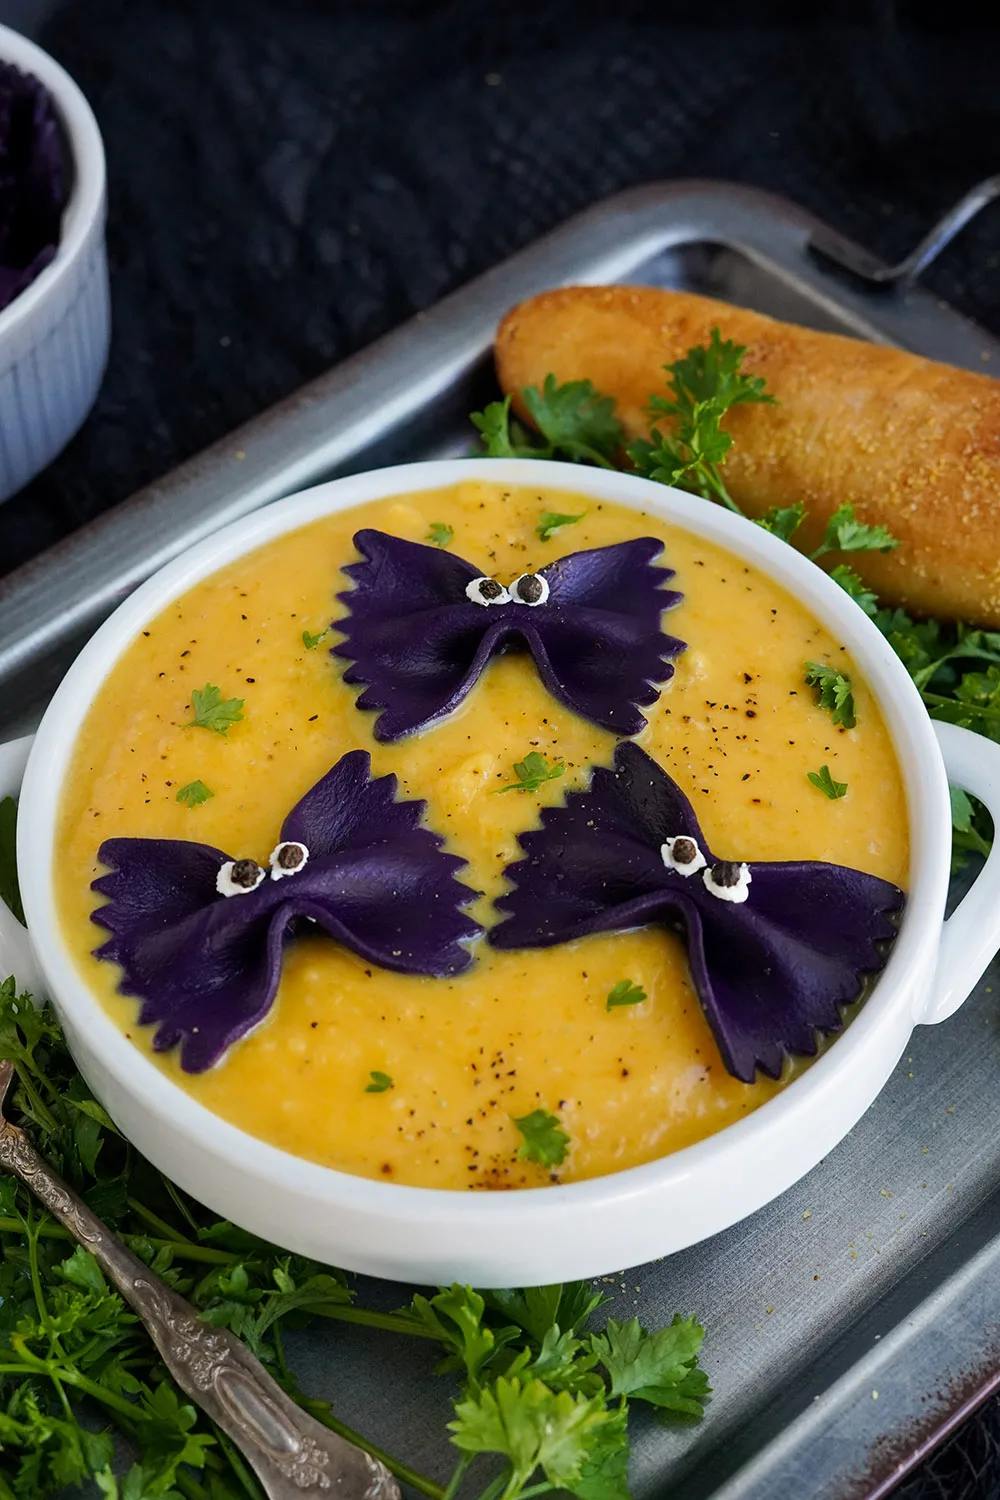 Bowl of soup with pasta bats with eyes with bread next to it on a baking sheet.